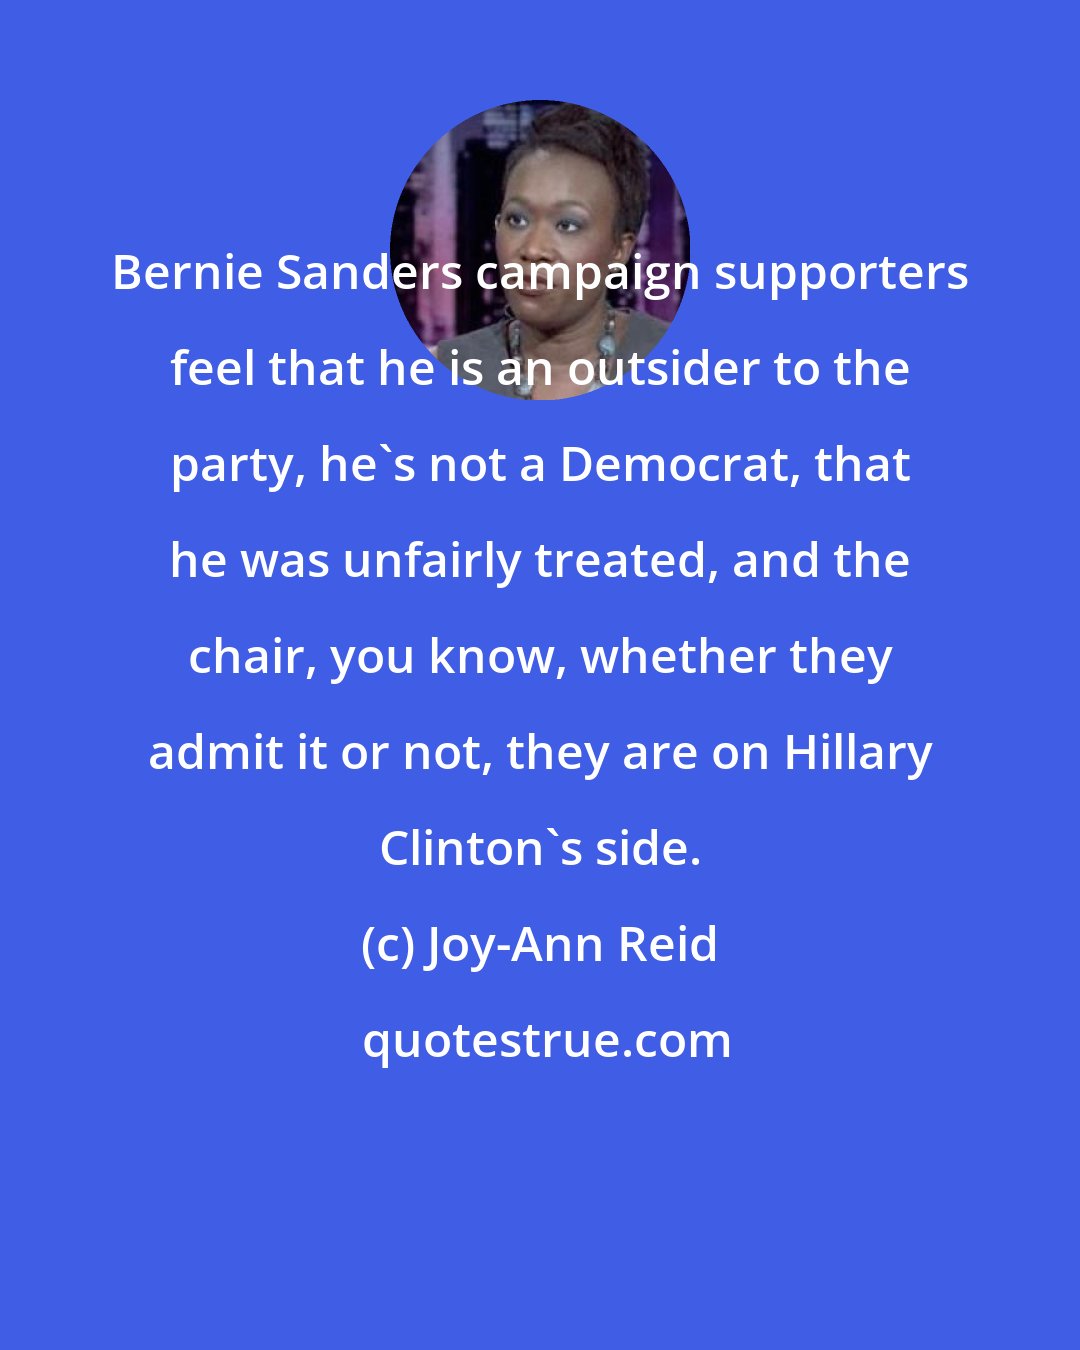 Joy-Ann Reid: Bernie Sanders campaign supporters feel that he is an outsider to the party, he`s not a Democrat, that he was unfairly treated, and the chair, you know, whether they admit it or not, they are on Hillary Clinton`s side.